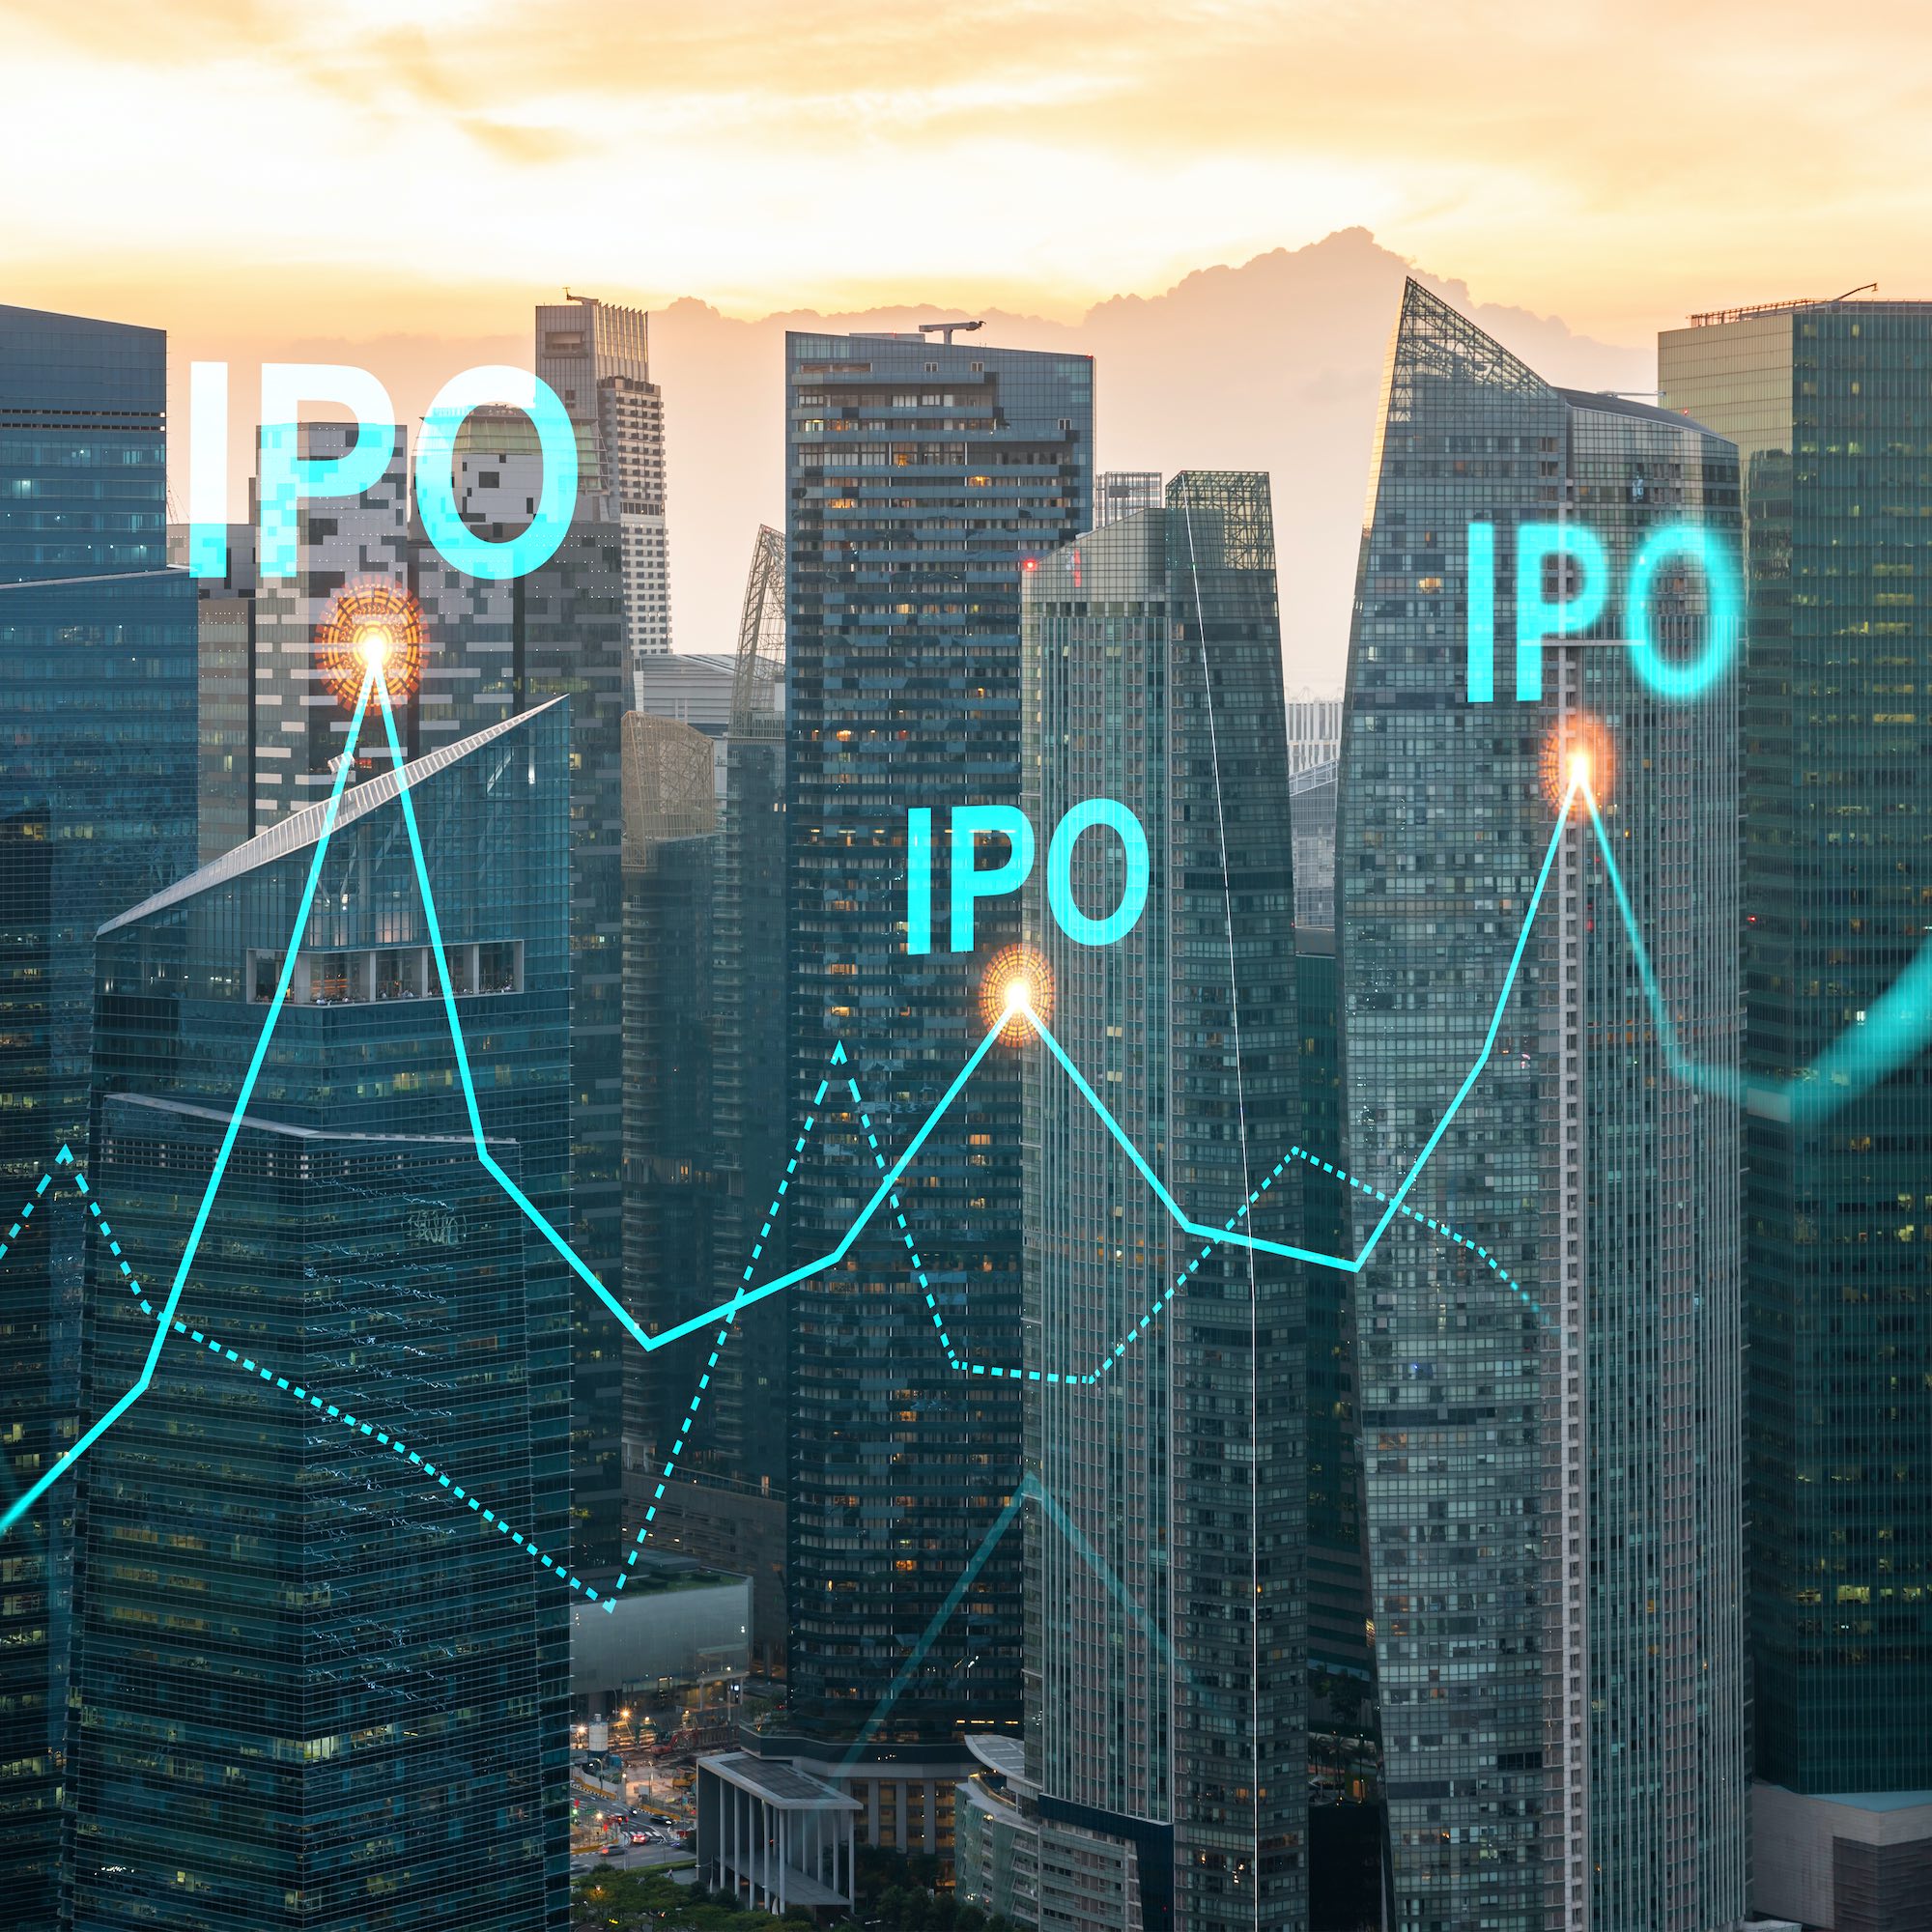 Ipo Activity Expected To Surge In 2021 As Confidence Grows North East Times